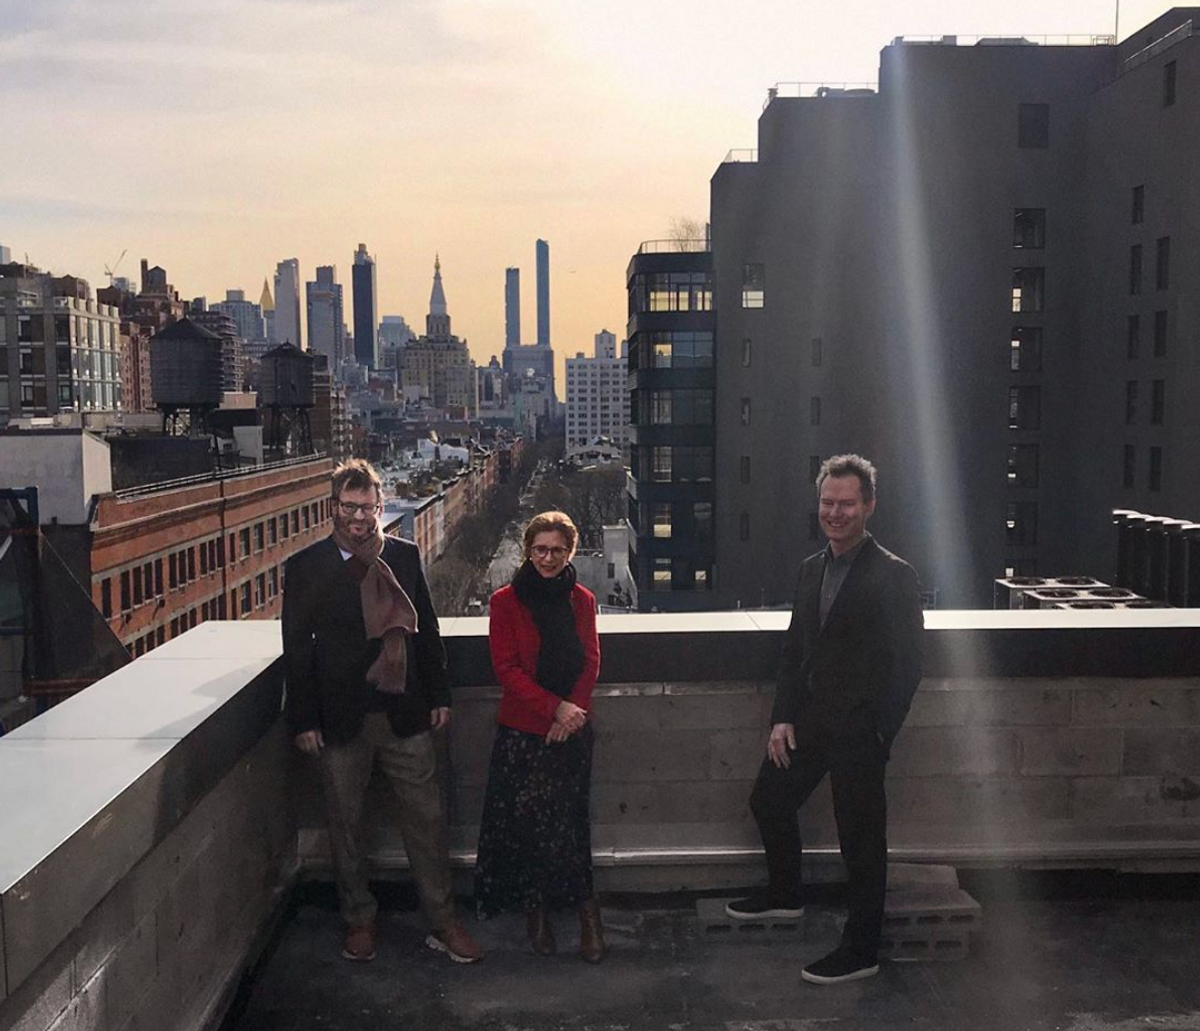 Iwan and Manuela Wirth and Marc Payot on the rooftop of Hauser & Wirth New York, 22nd Street, February 2020 Courtesy of Hauser & Wirth